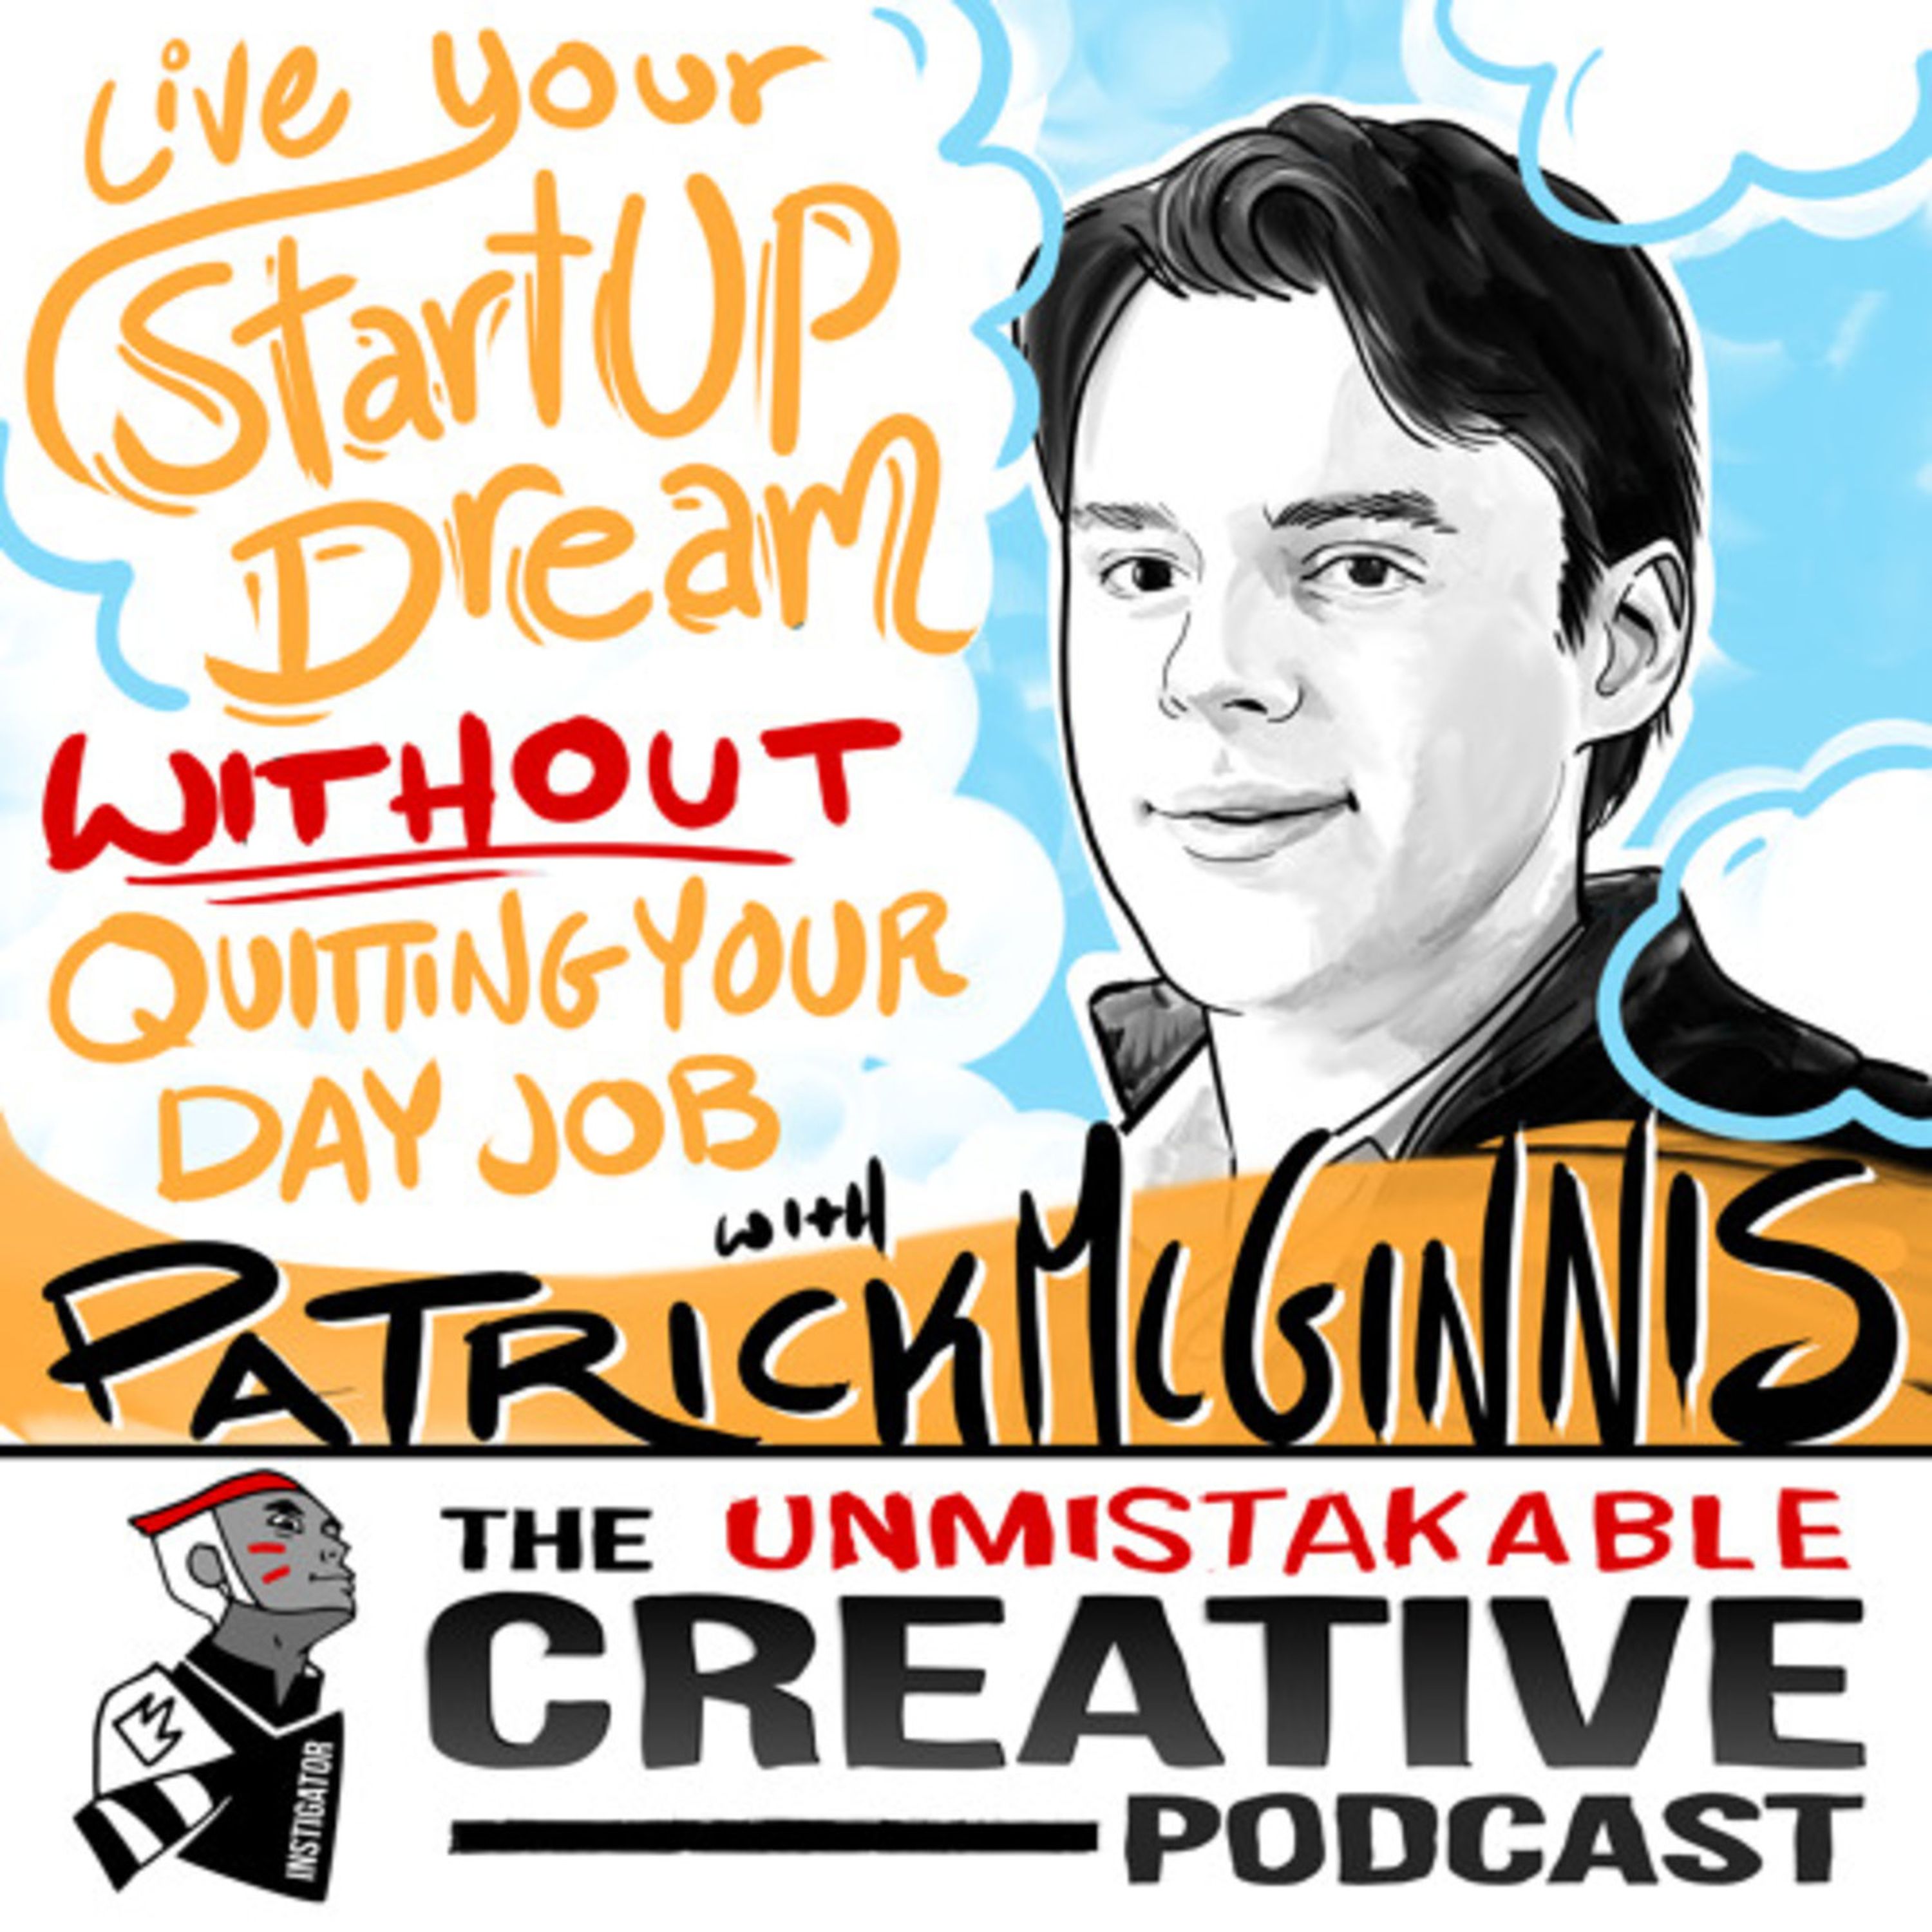 Live Your Startup Dream Without Quitting Your Day Job with Patrick Mcginnis